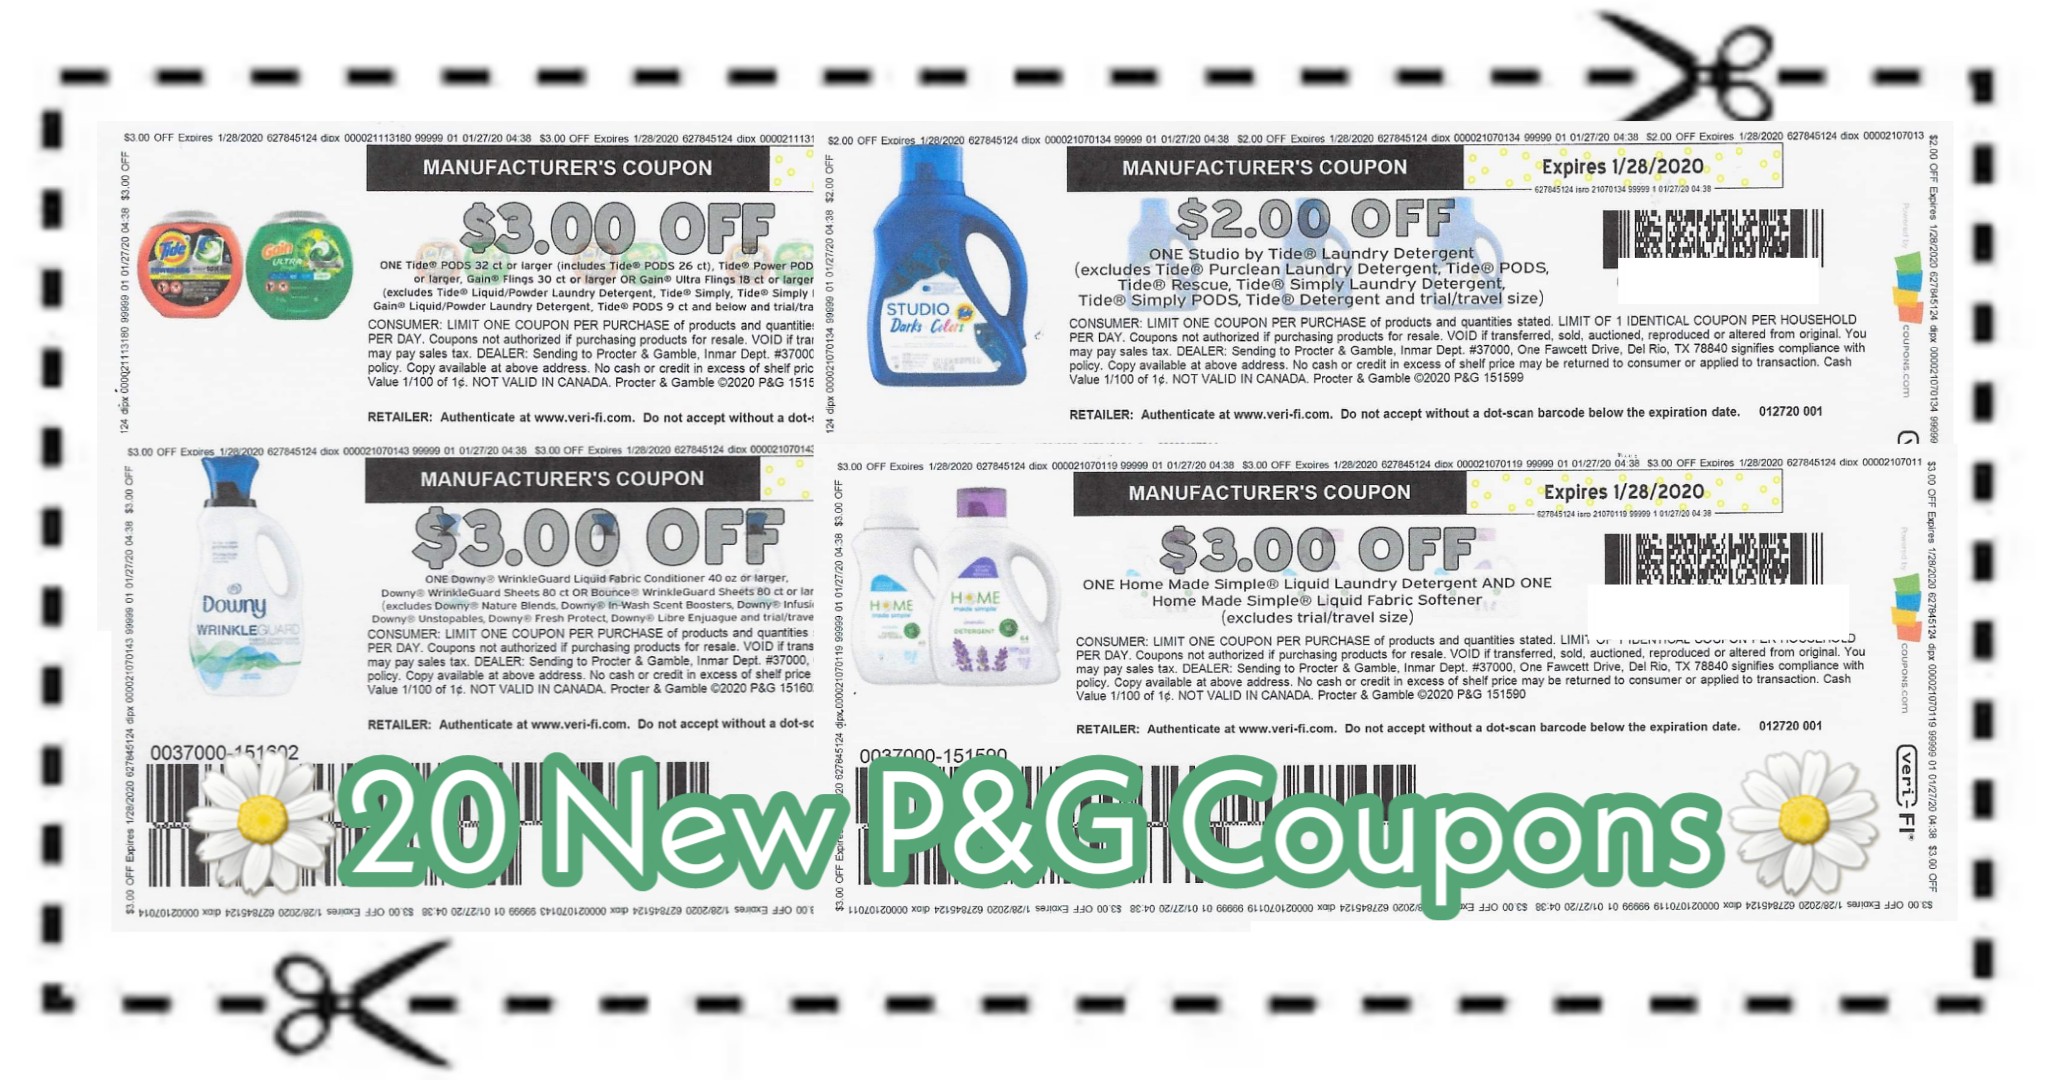 20 New P G Coupons Click to Print